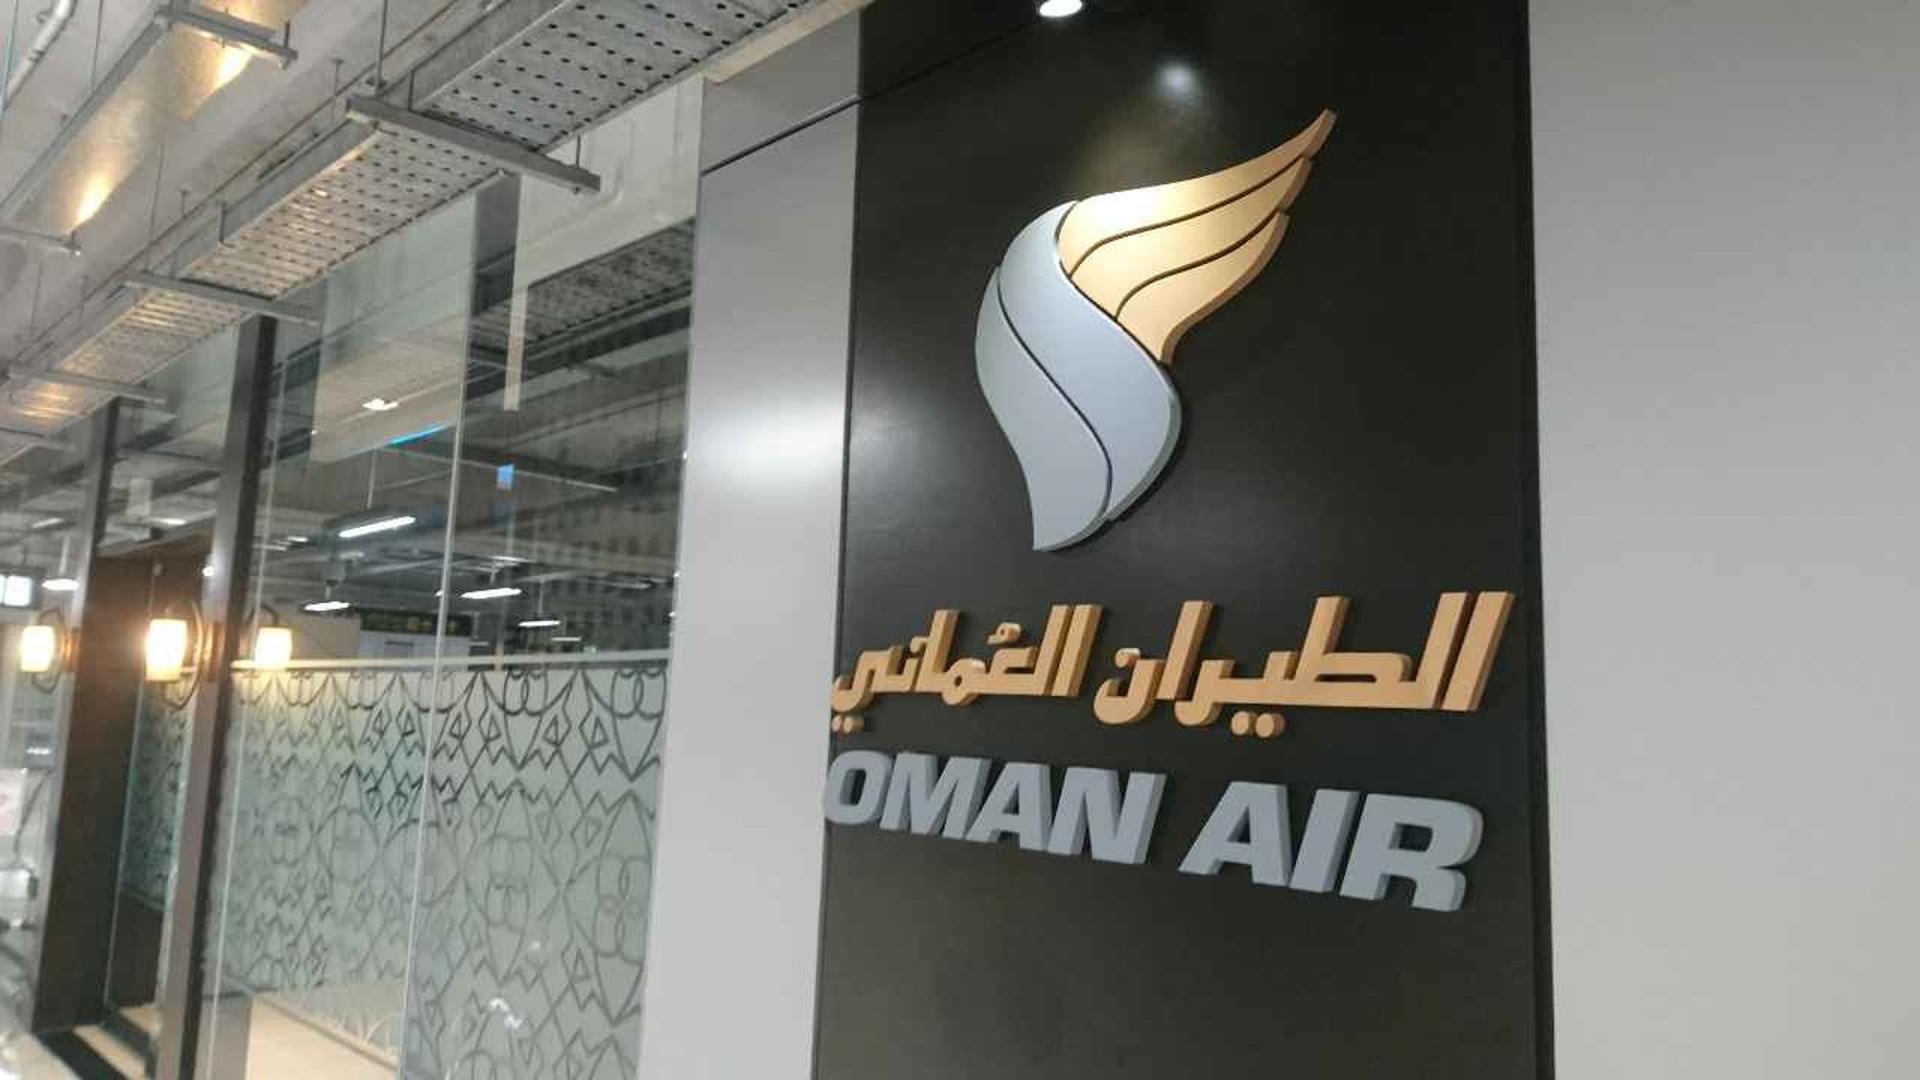 Oman Air First and Business Class Lounge image 23 of 50